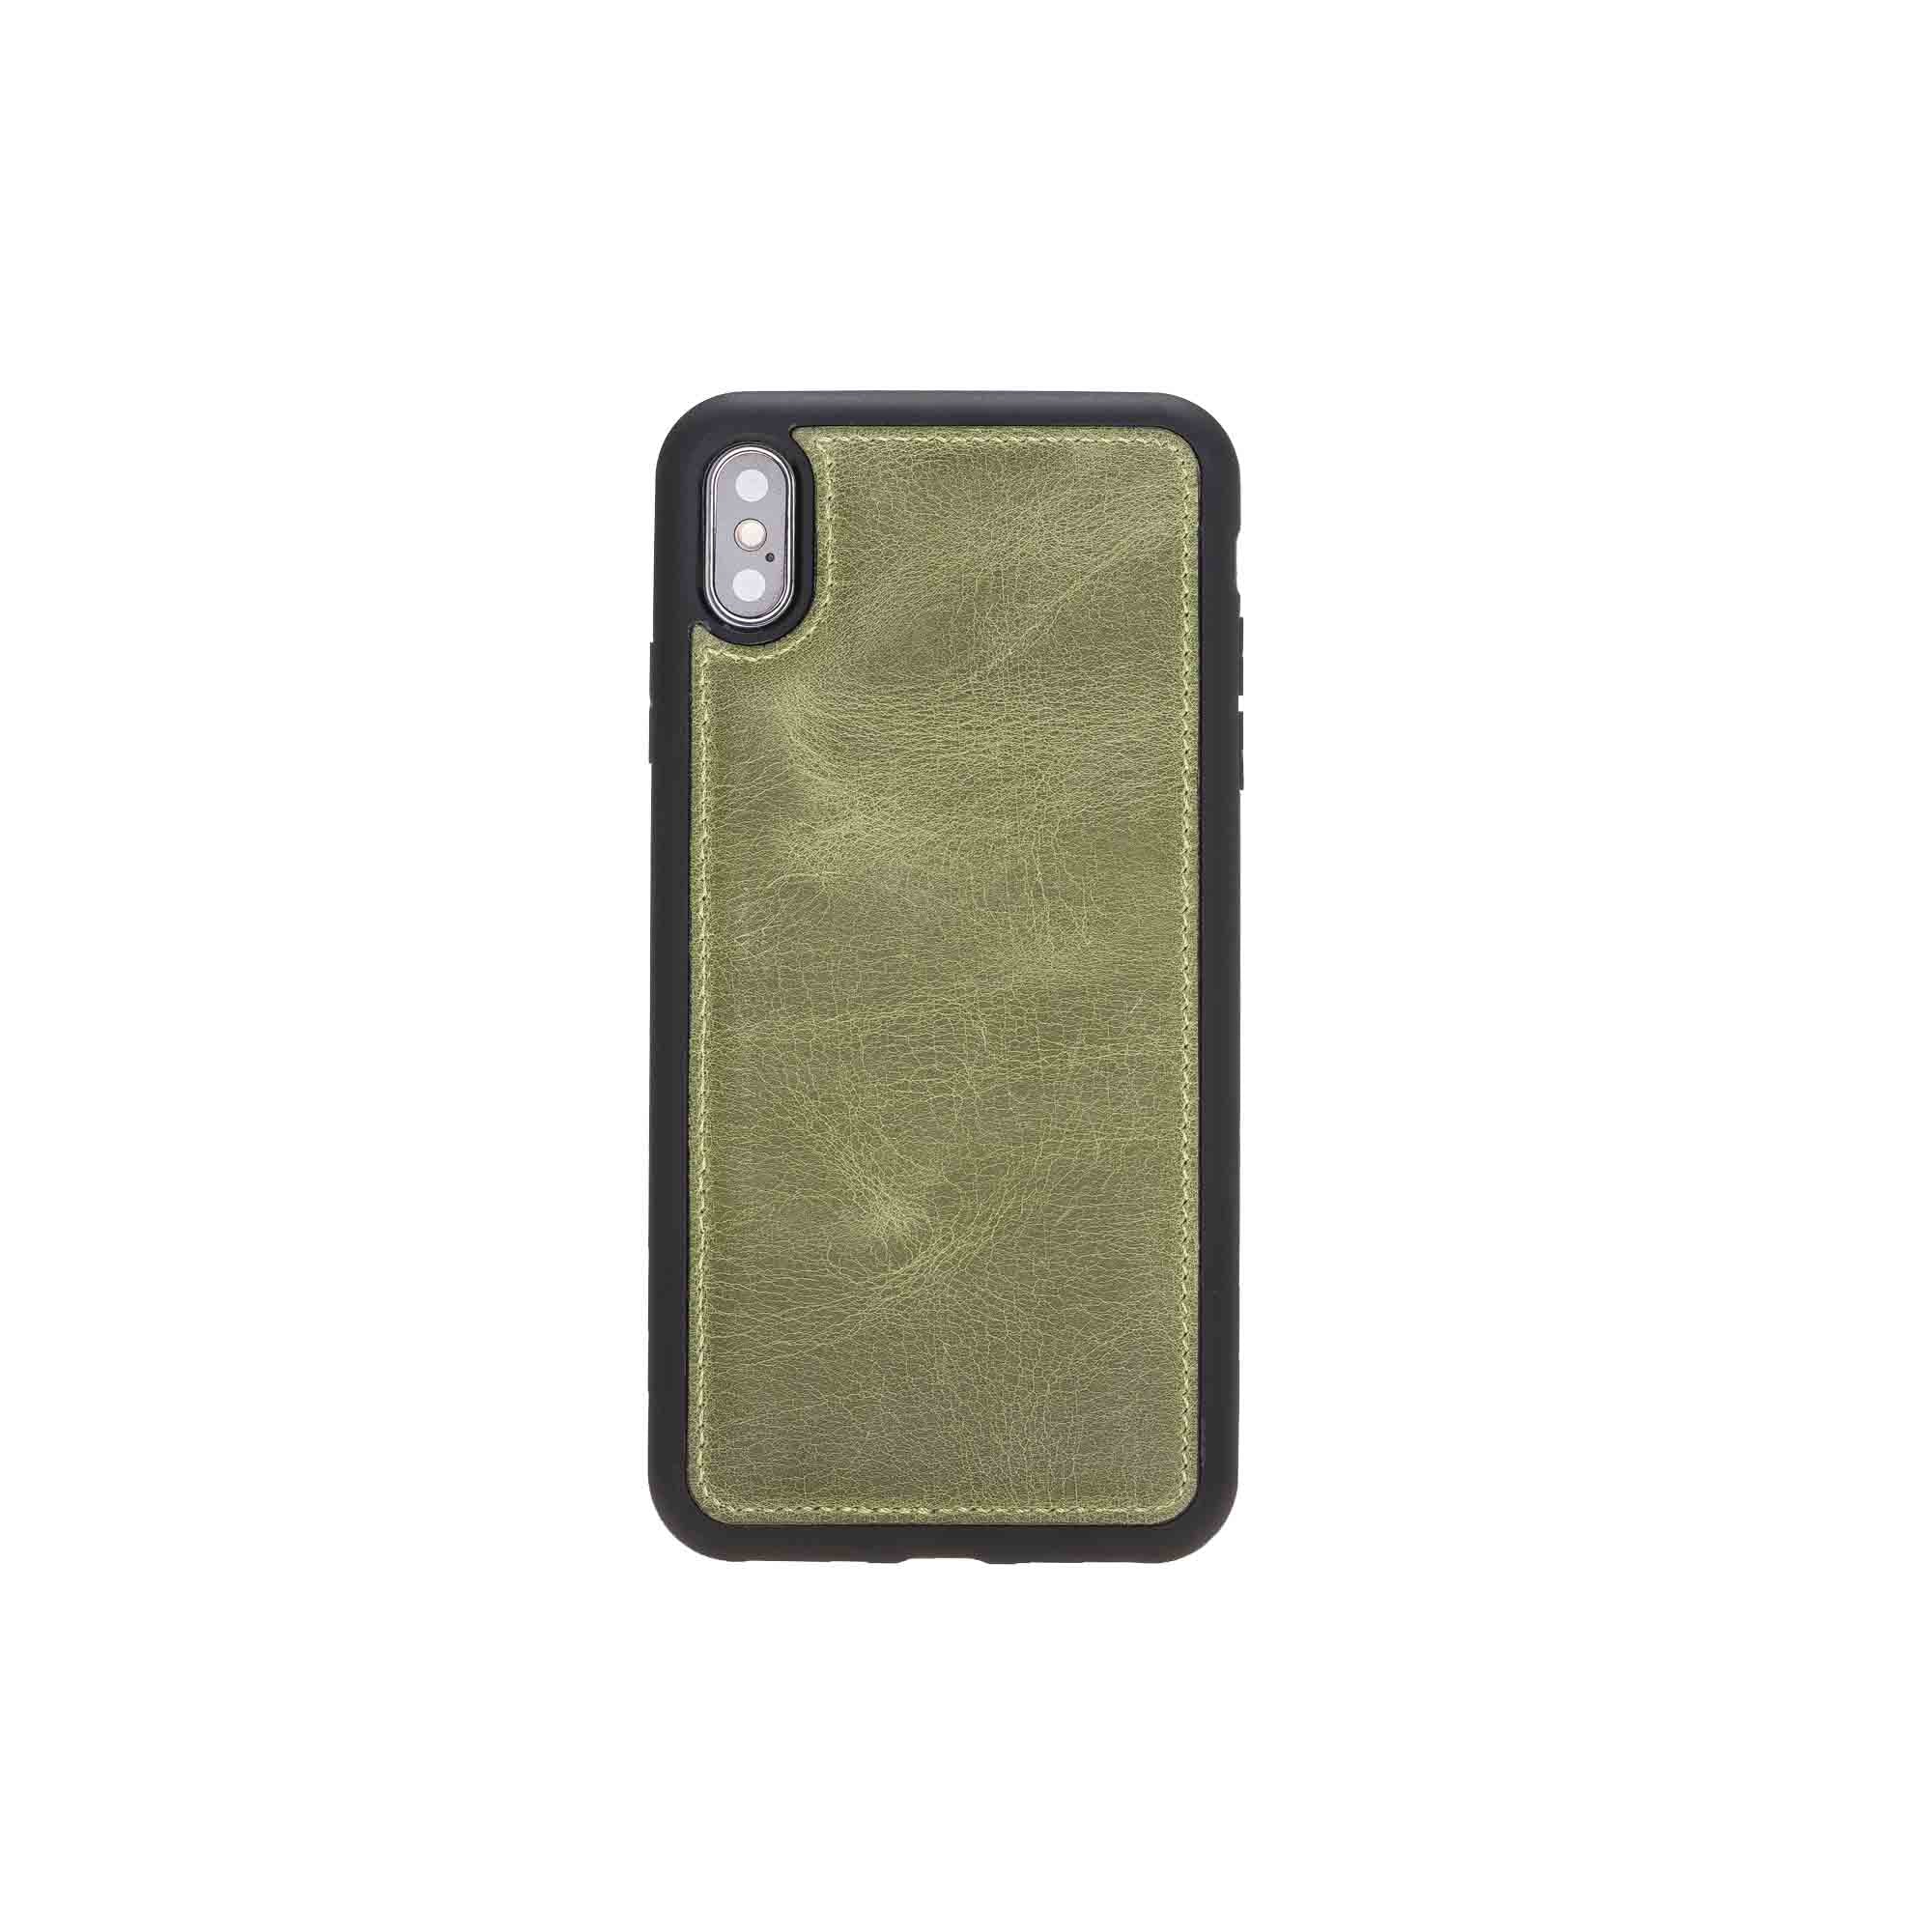 Flex Cover Leather Case for iPhone XS Max (6.5") - GREEN - saracleather